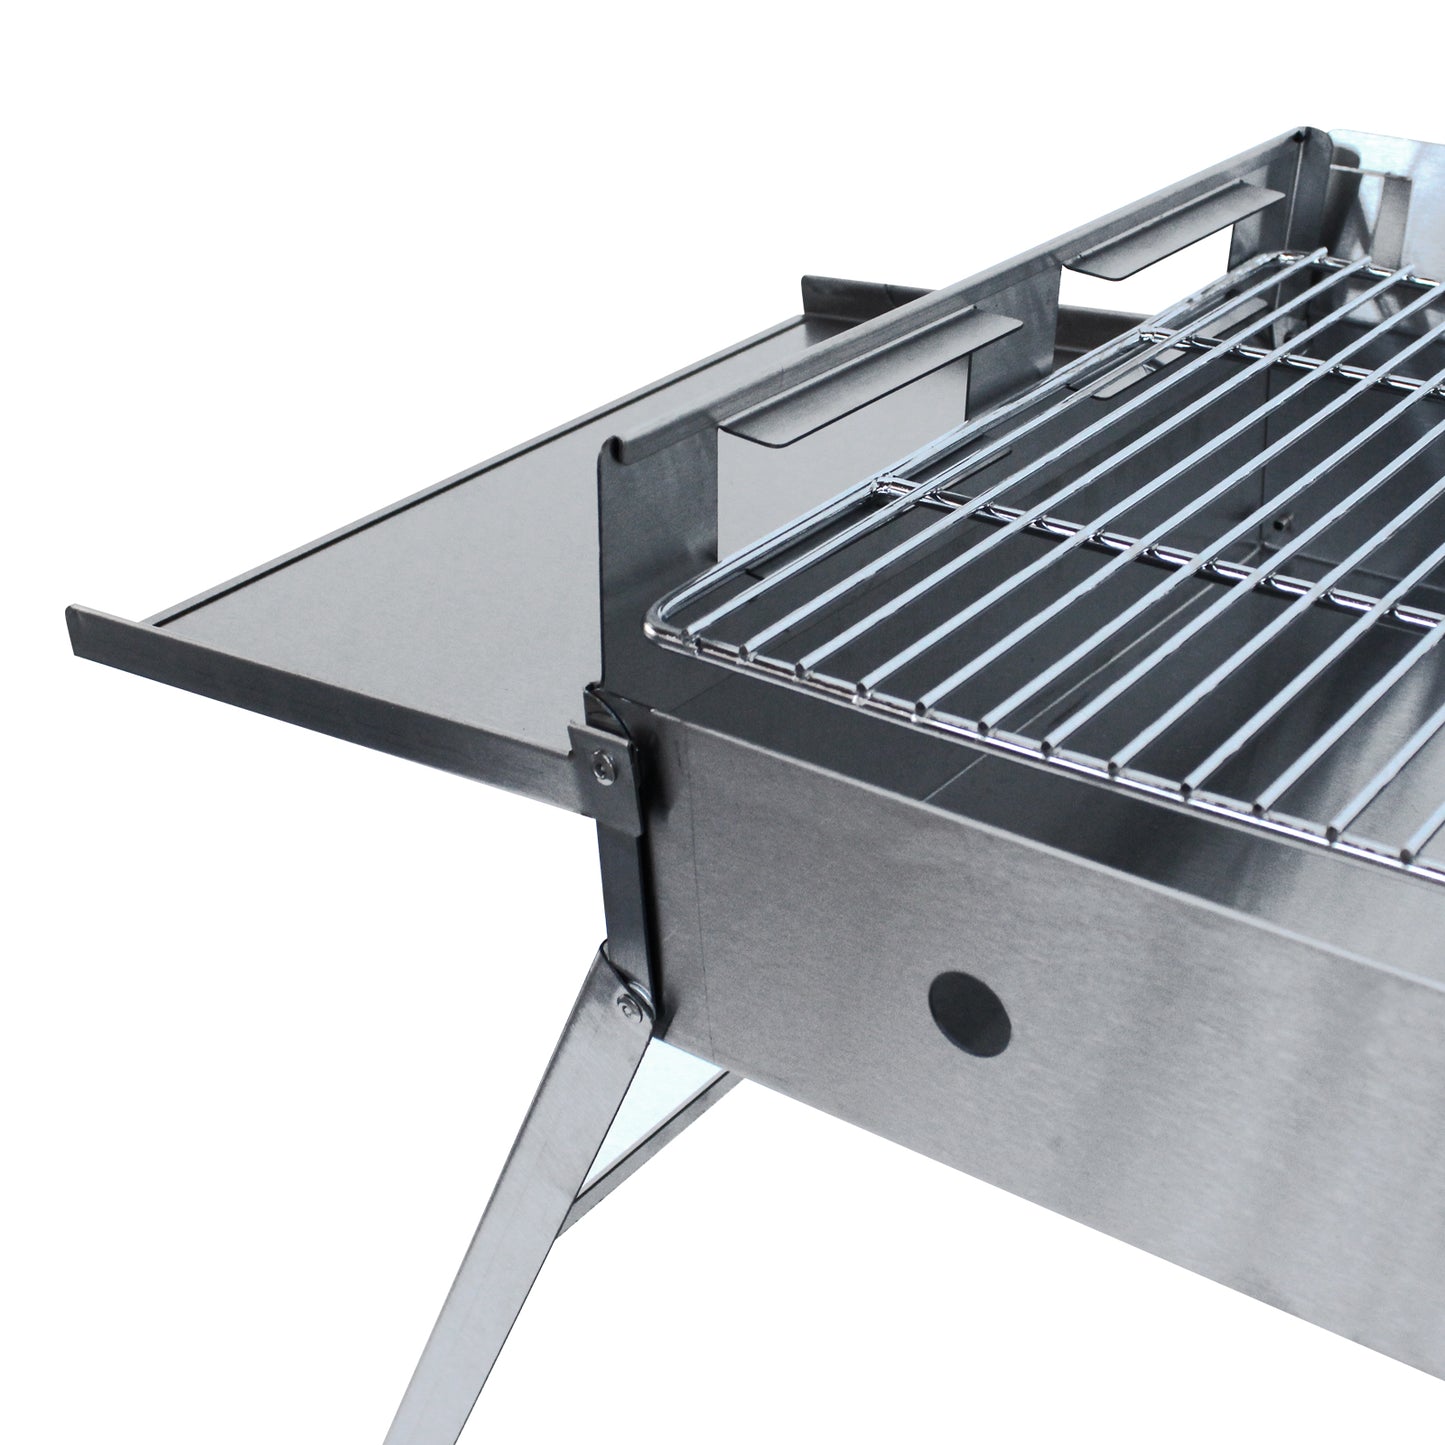 Camper Braai Barbecue Grill Stainless Steel